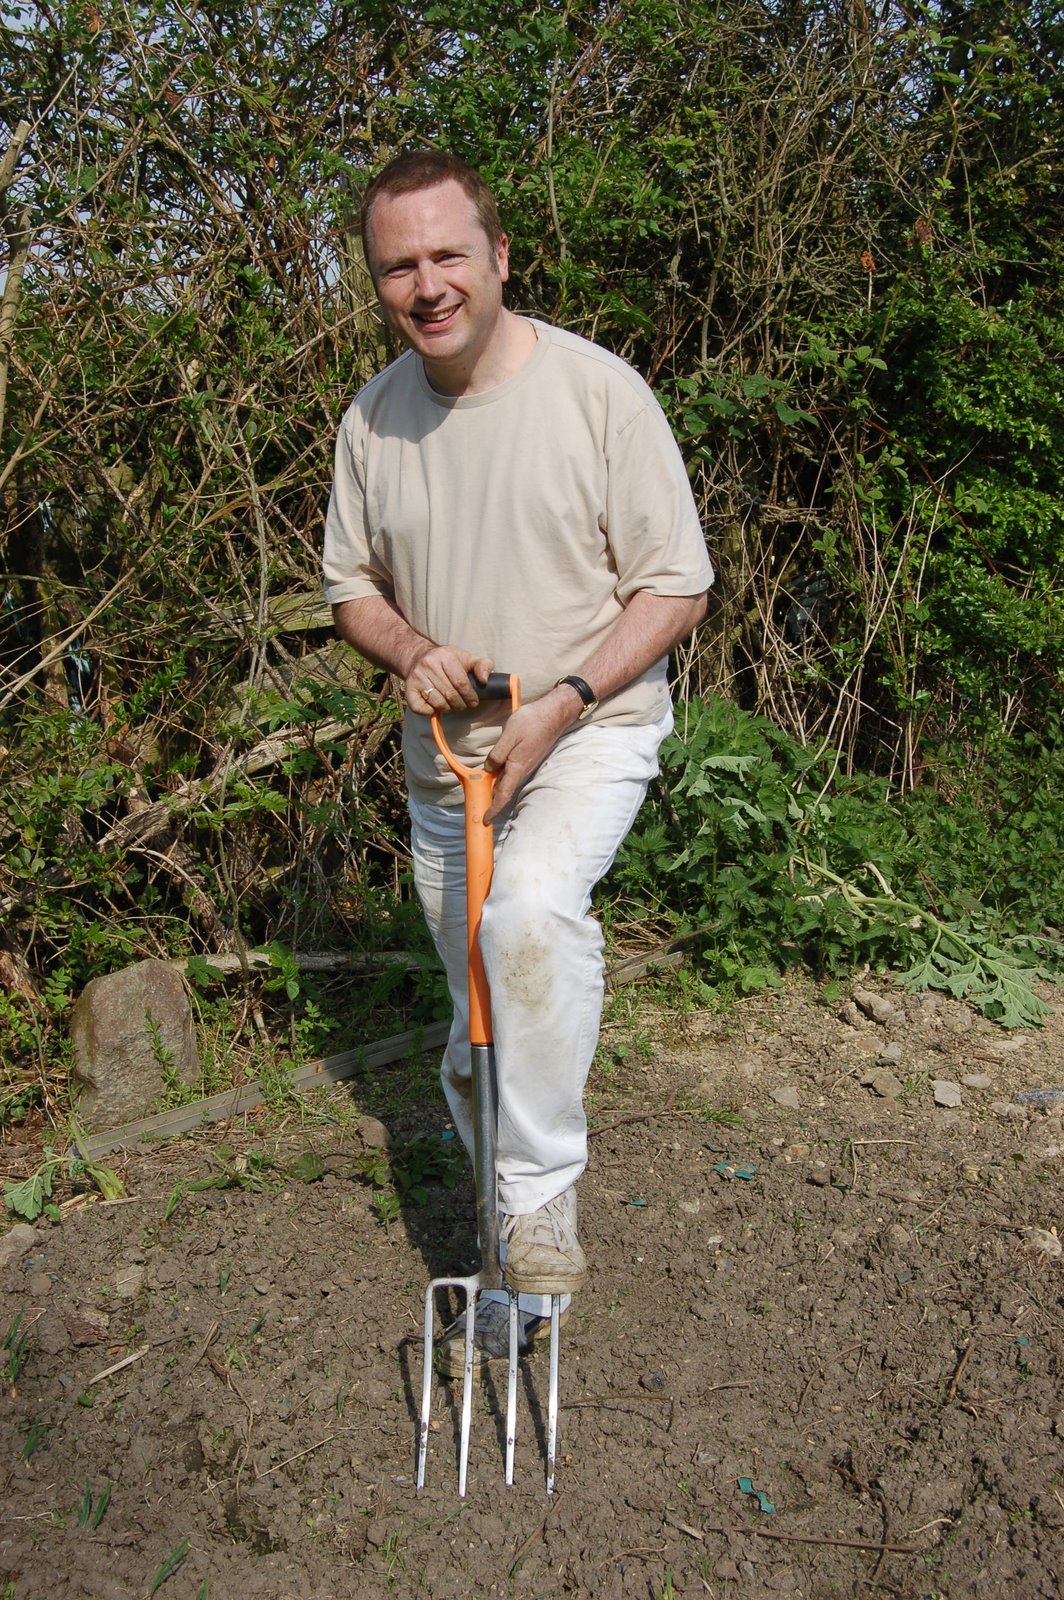 Hard graft on the allotment